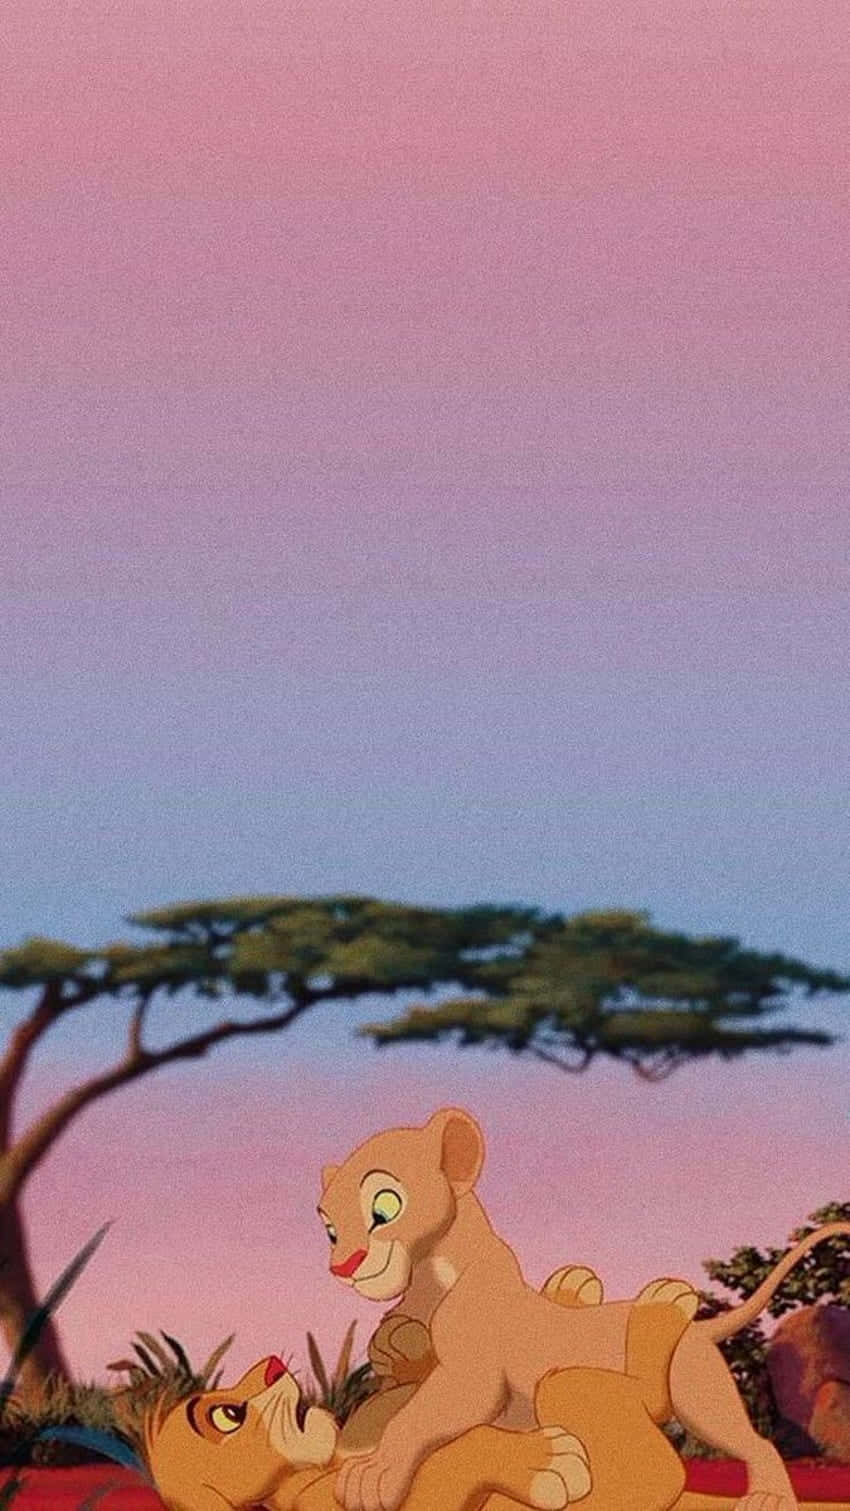 IPhone wallpaper lion king with high-resolution 1080x1920 pixel. You can use this wallpaper for your iPhone 5, 6, 7, 8, X, XS, XR backgrounds, Mobile Screensaver, or iPad Lock Screen - The Lion King, lion